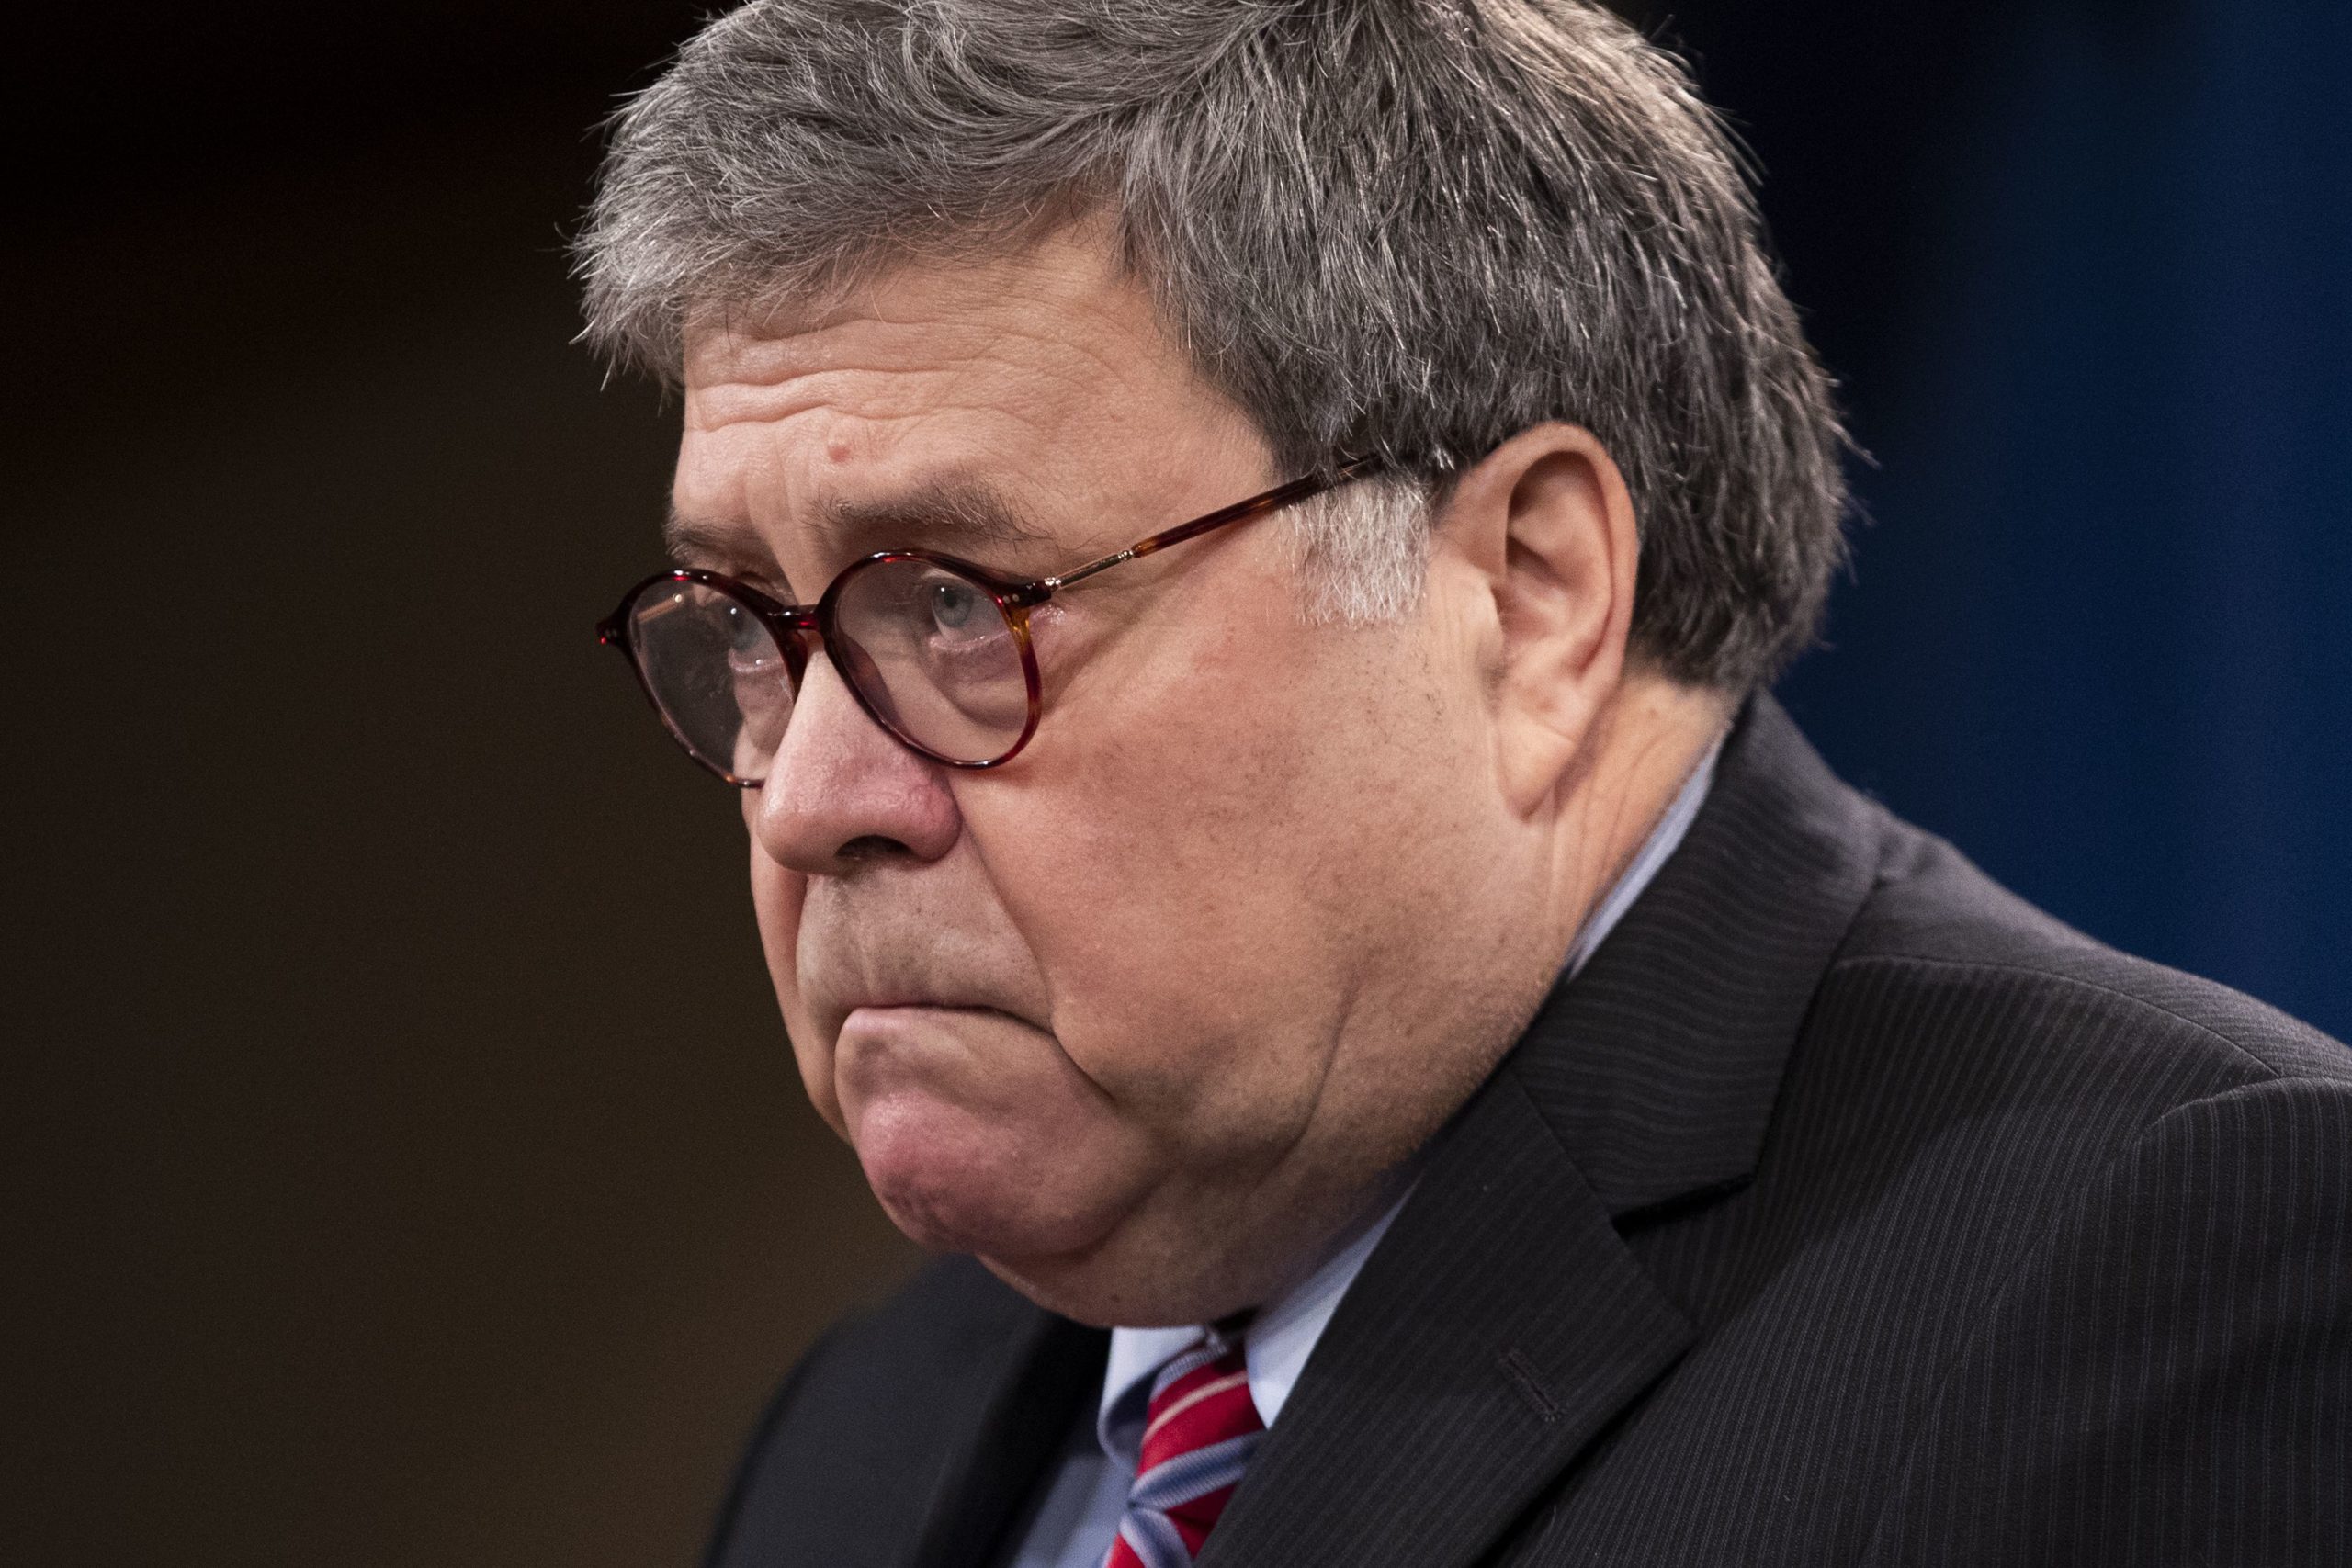 DC Bar Leaders Add to their Ethics Complaint Against former U.S. Attorney General William Barr